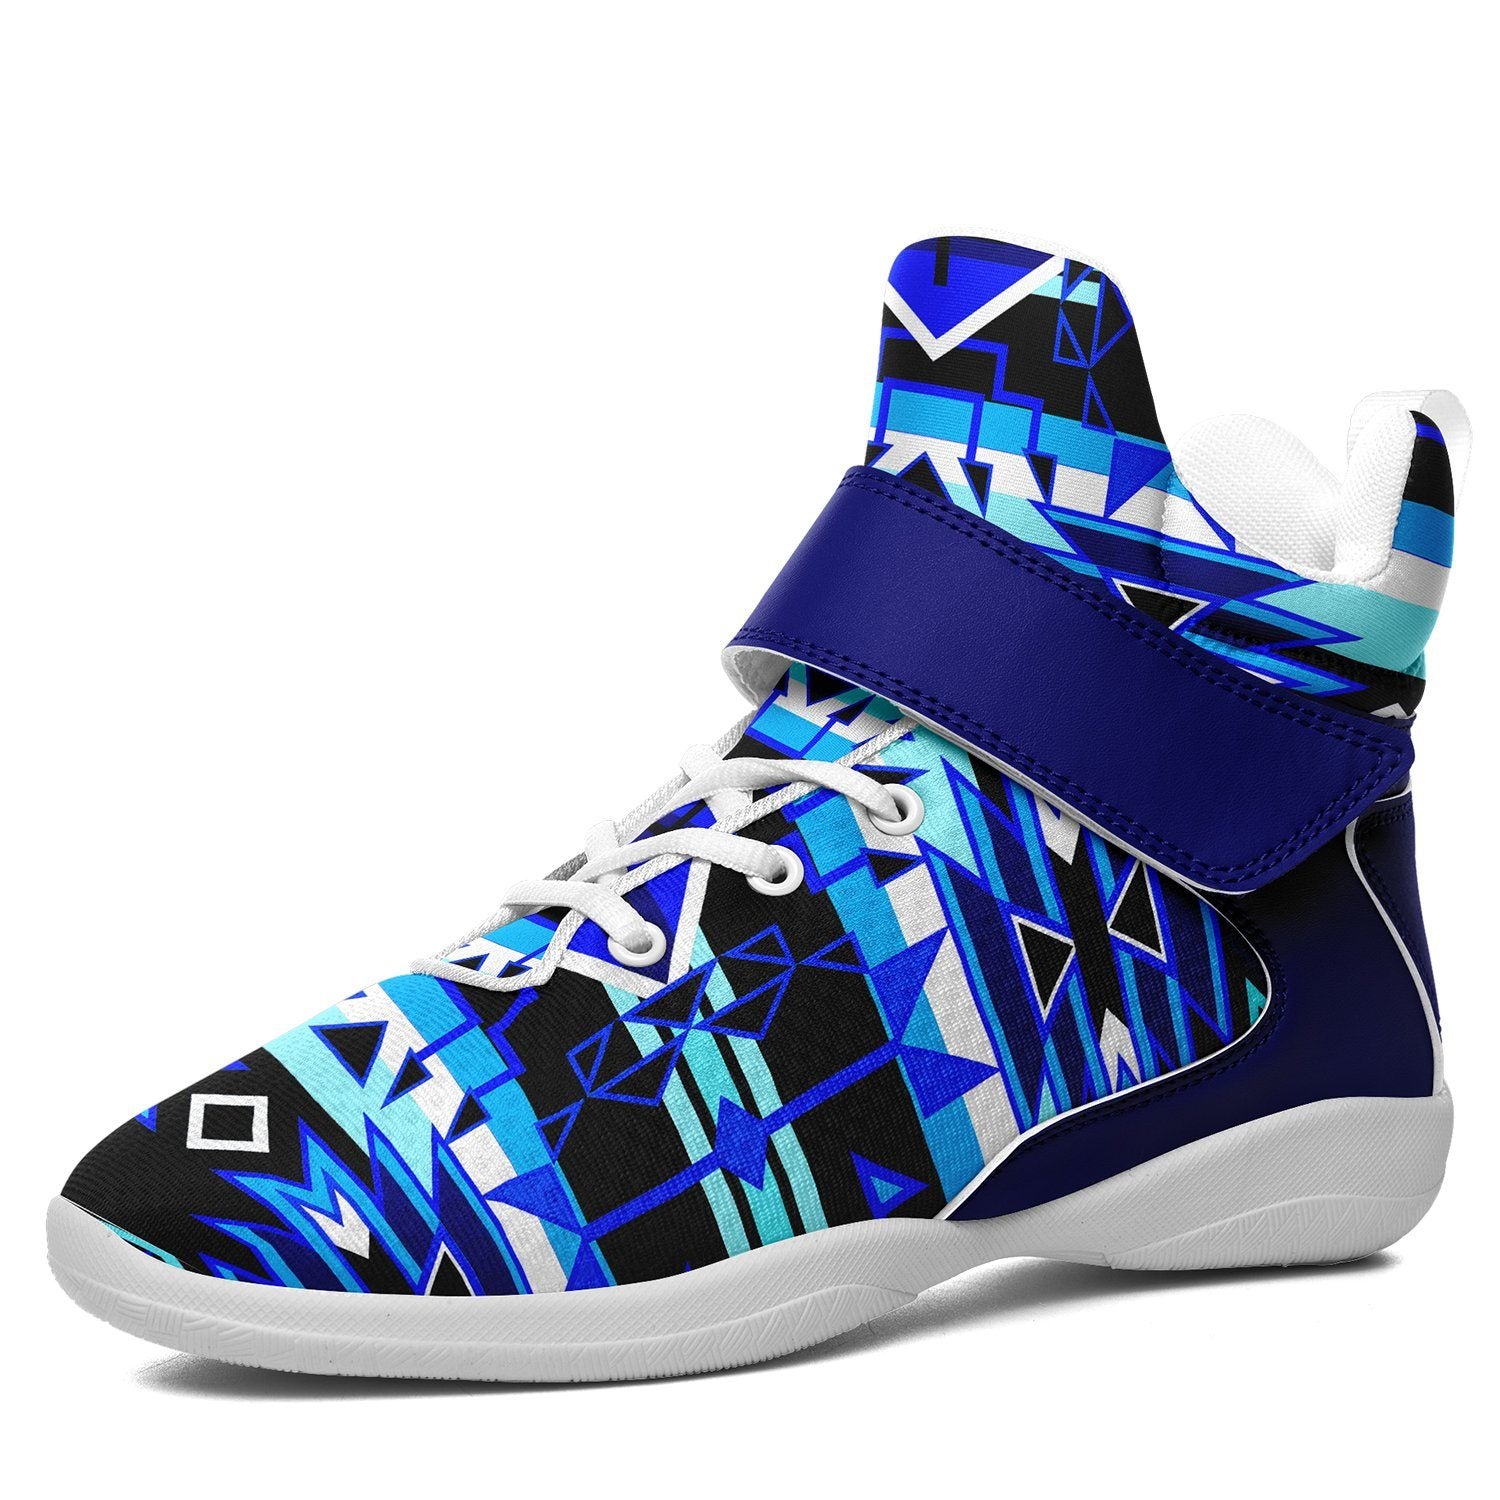 Force of Nature Winter Night Ipottaa Basketball / Sport High Top Shoes 49 Dzine US Women 4.5 / US Youth 3.5 / EUR 35 White Sole with Blue Strap 